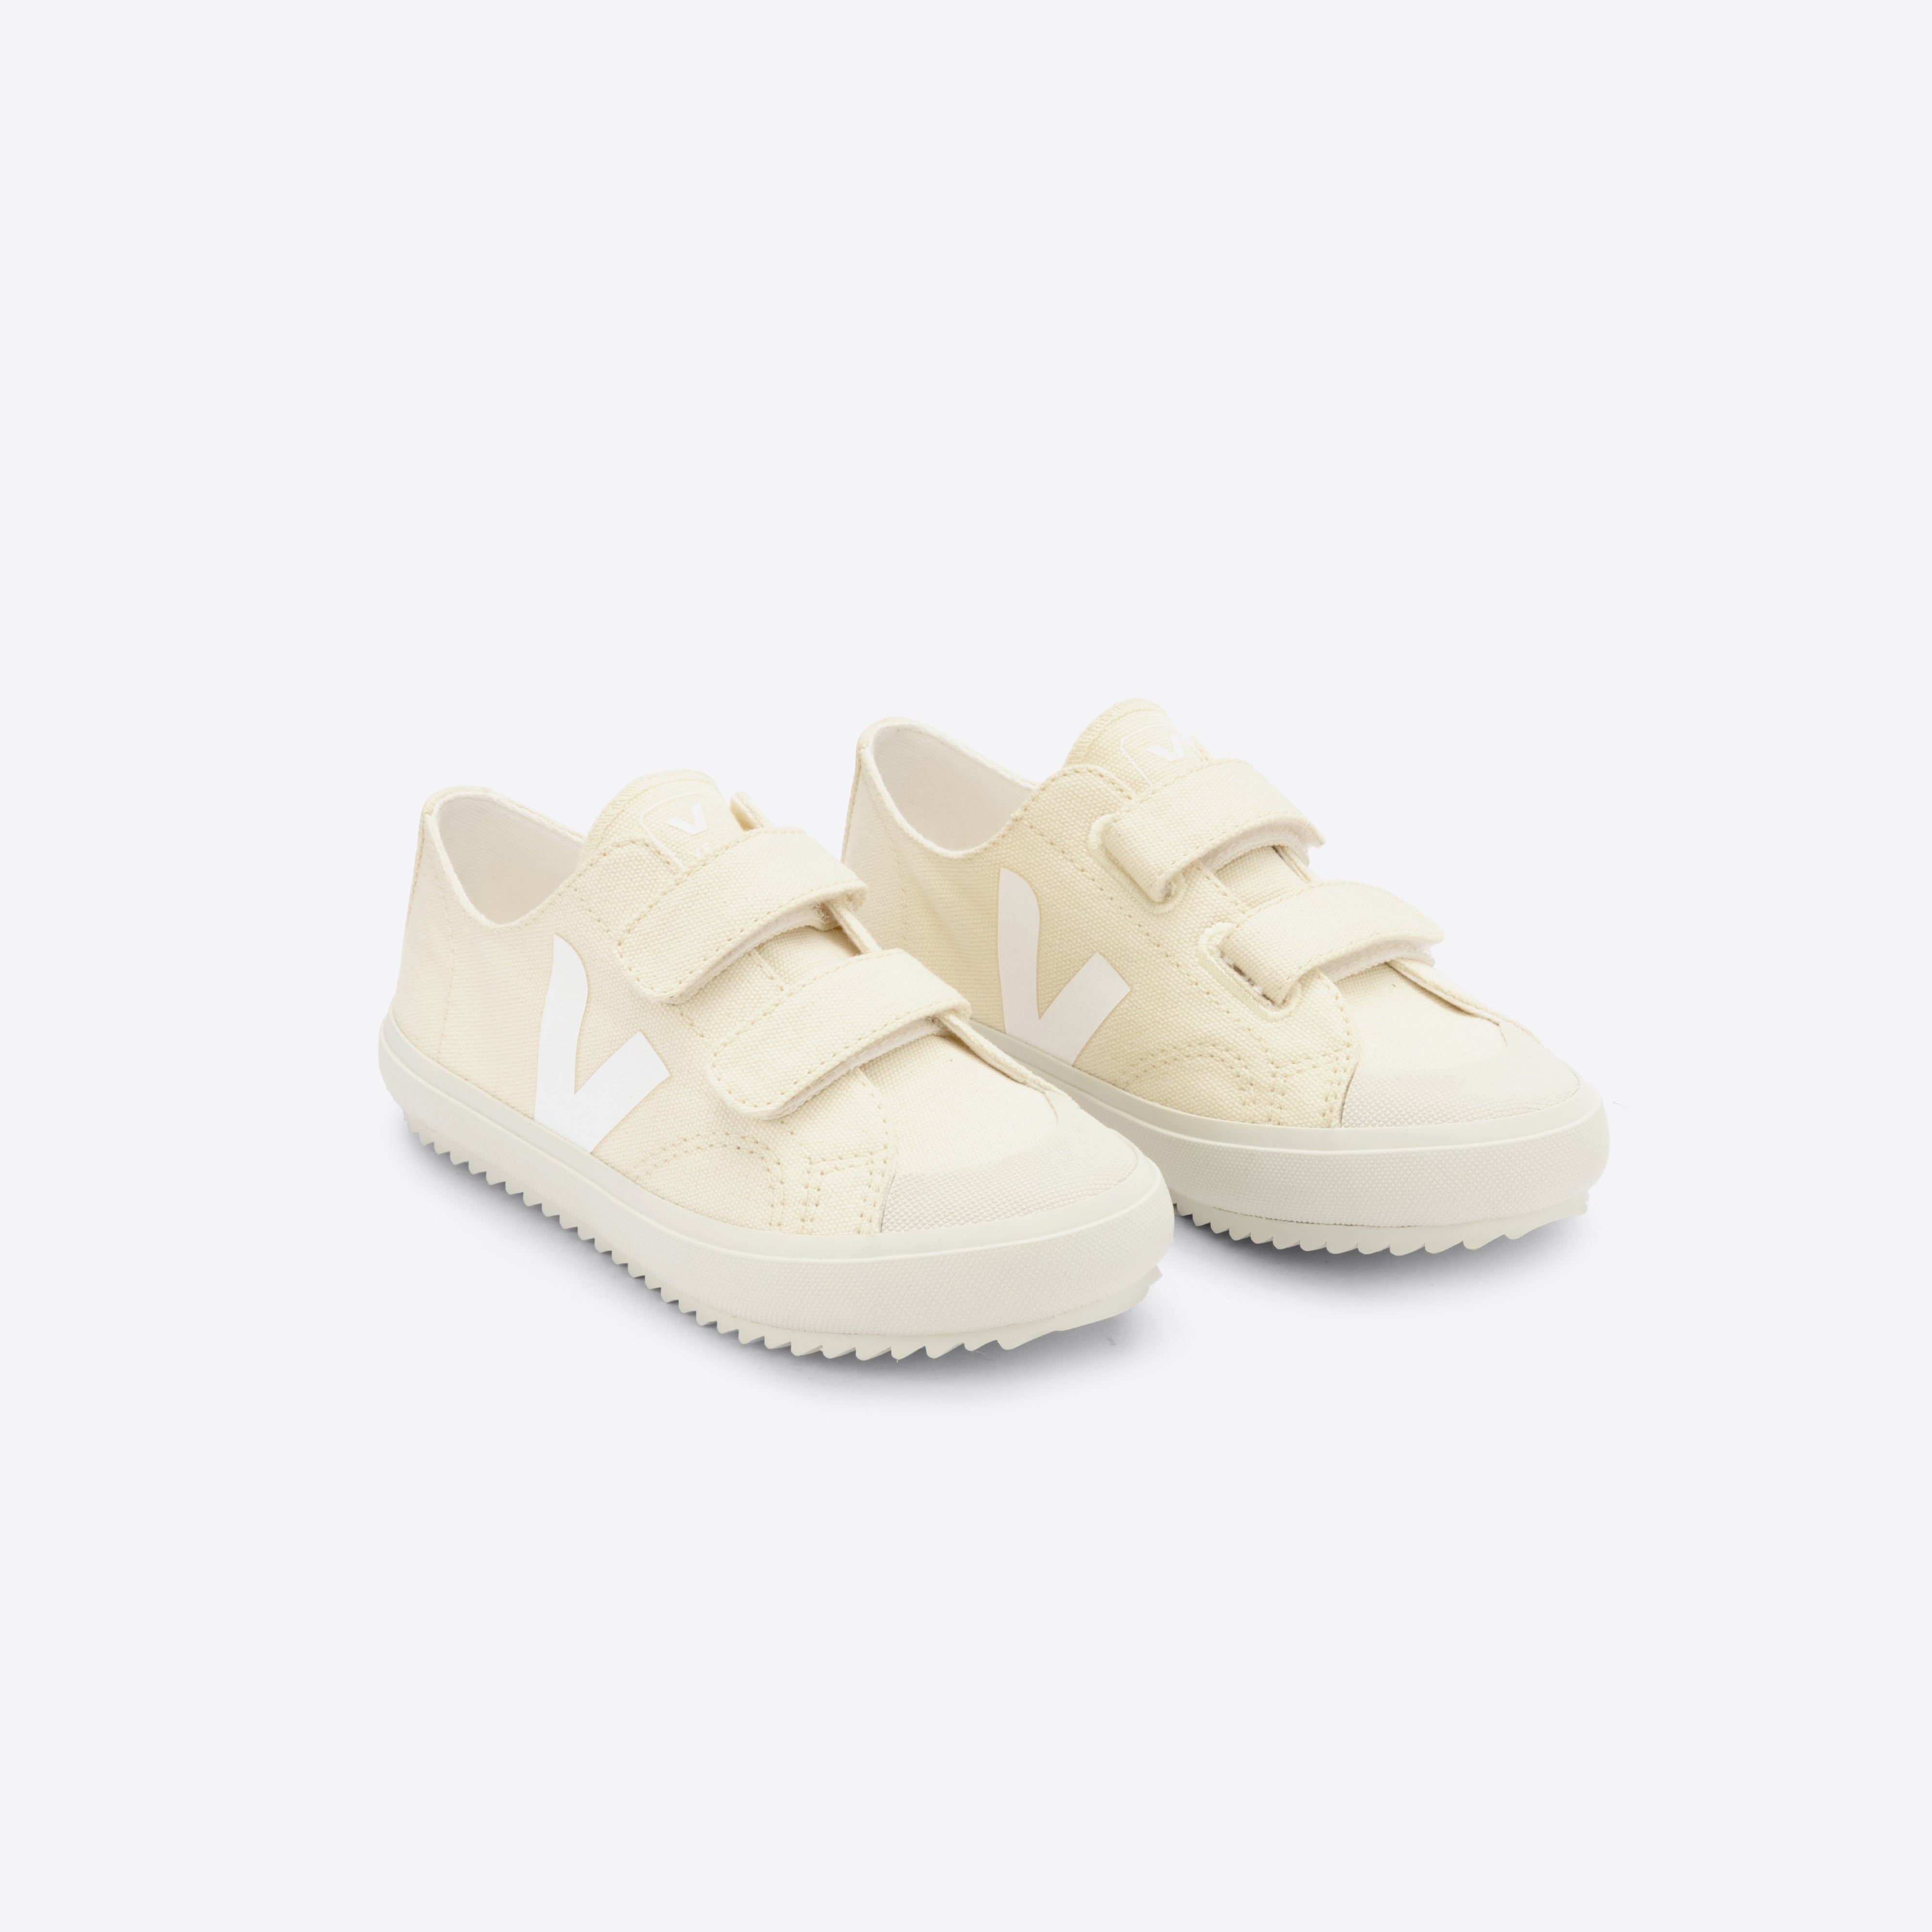 Boys & Girls White "OLLIE" Canvas Shoes